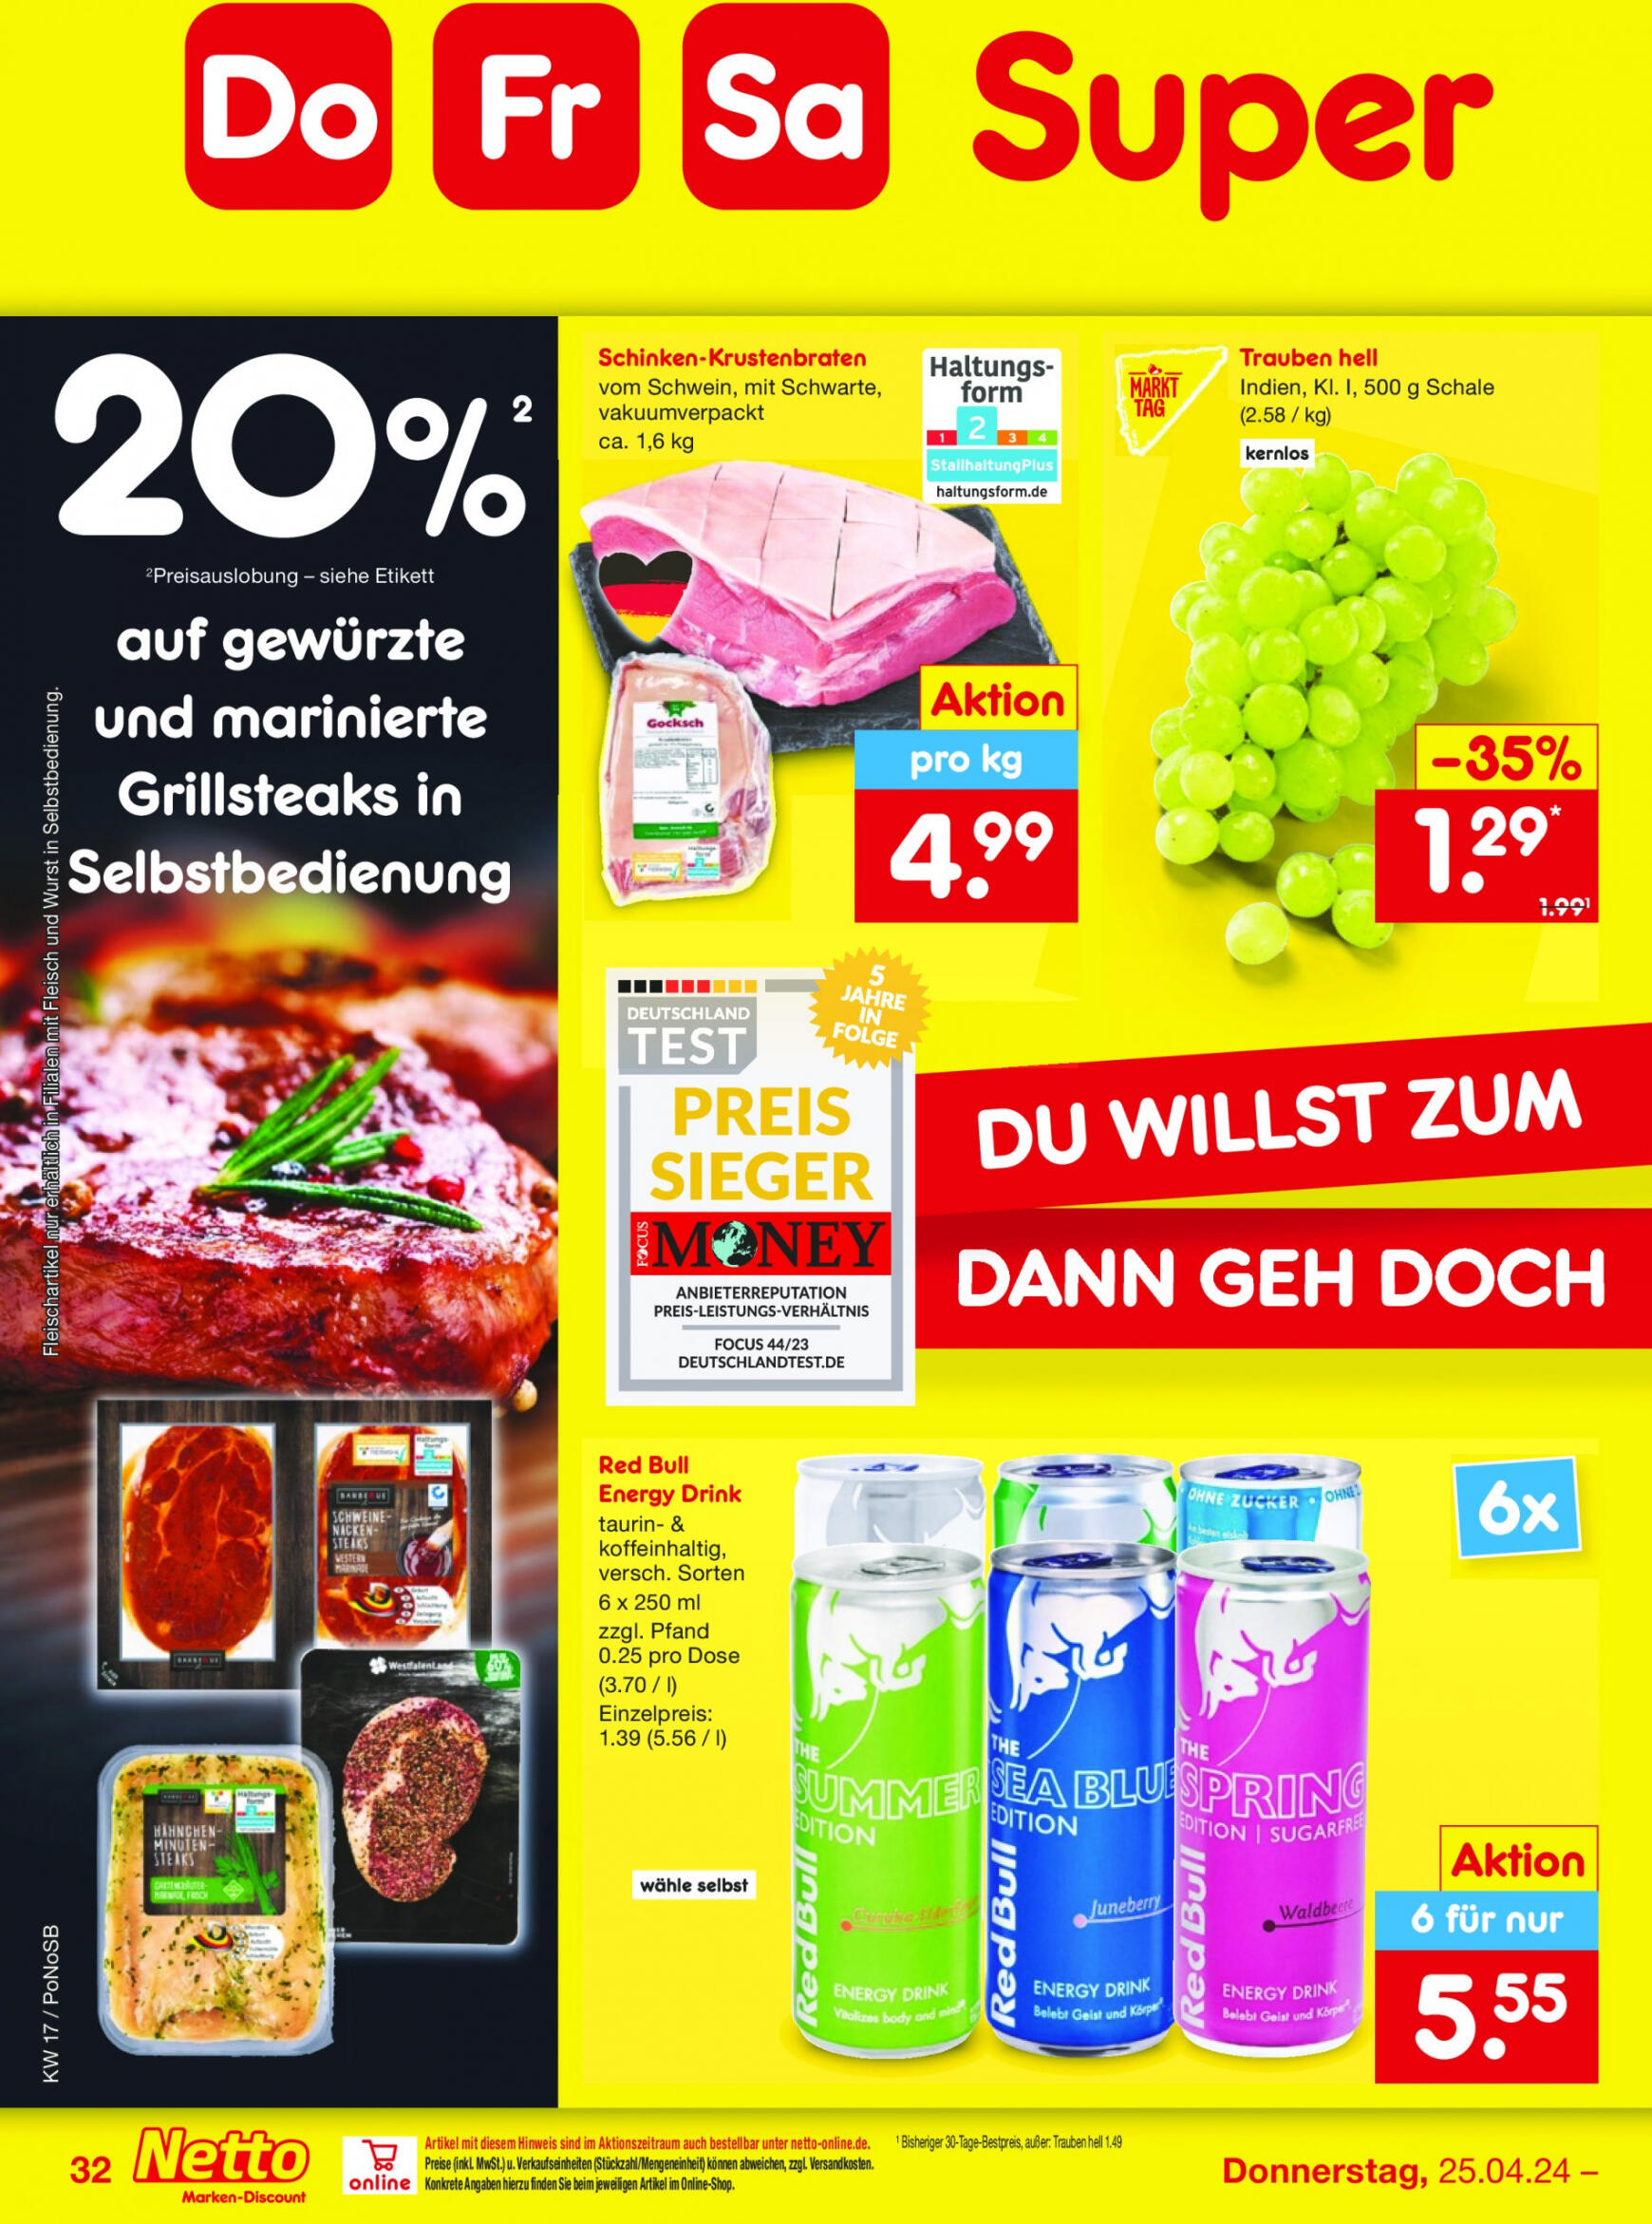 netto - Flyer Netto aktuell 22.04. - 27.04. - page: 38